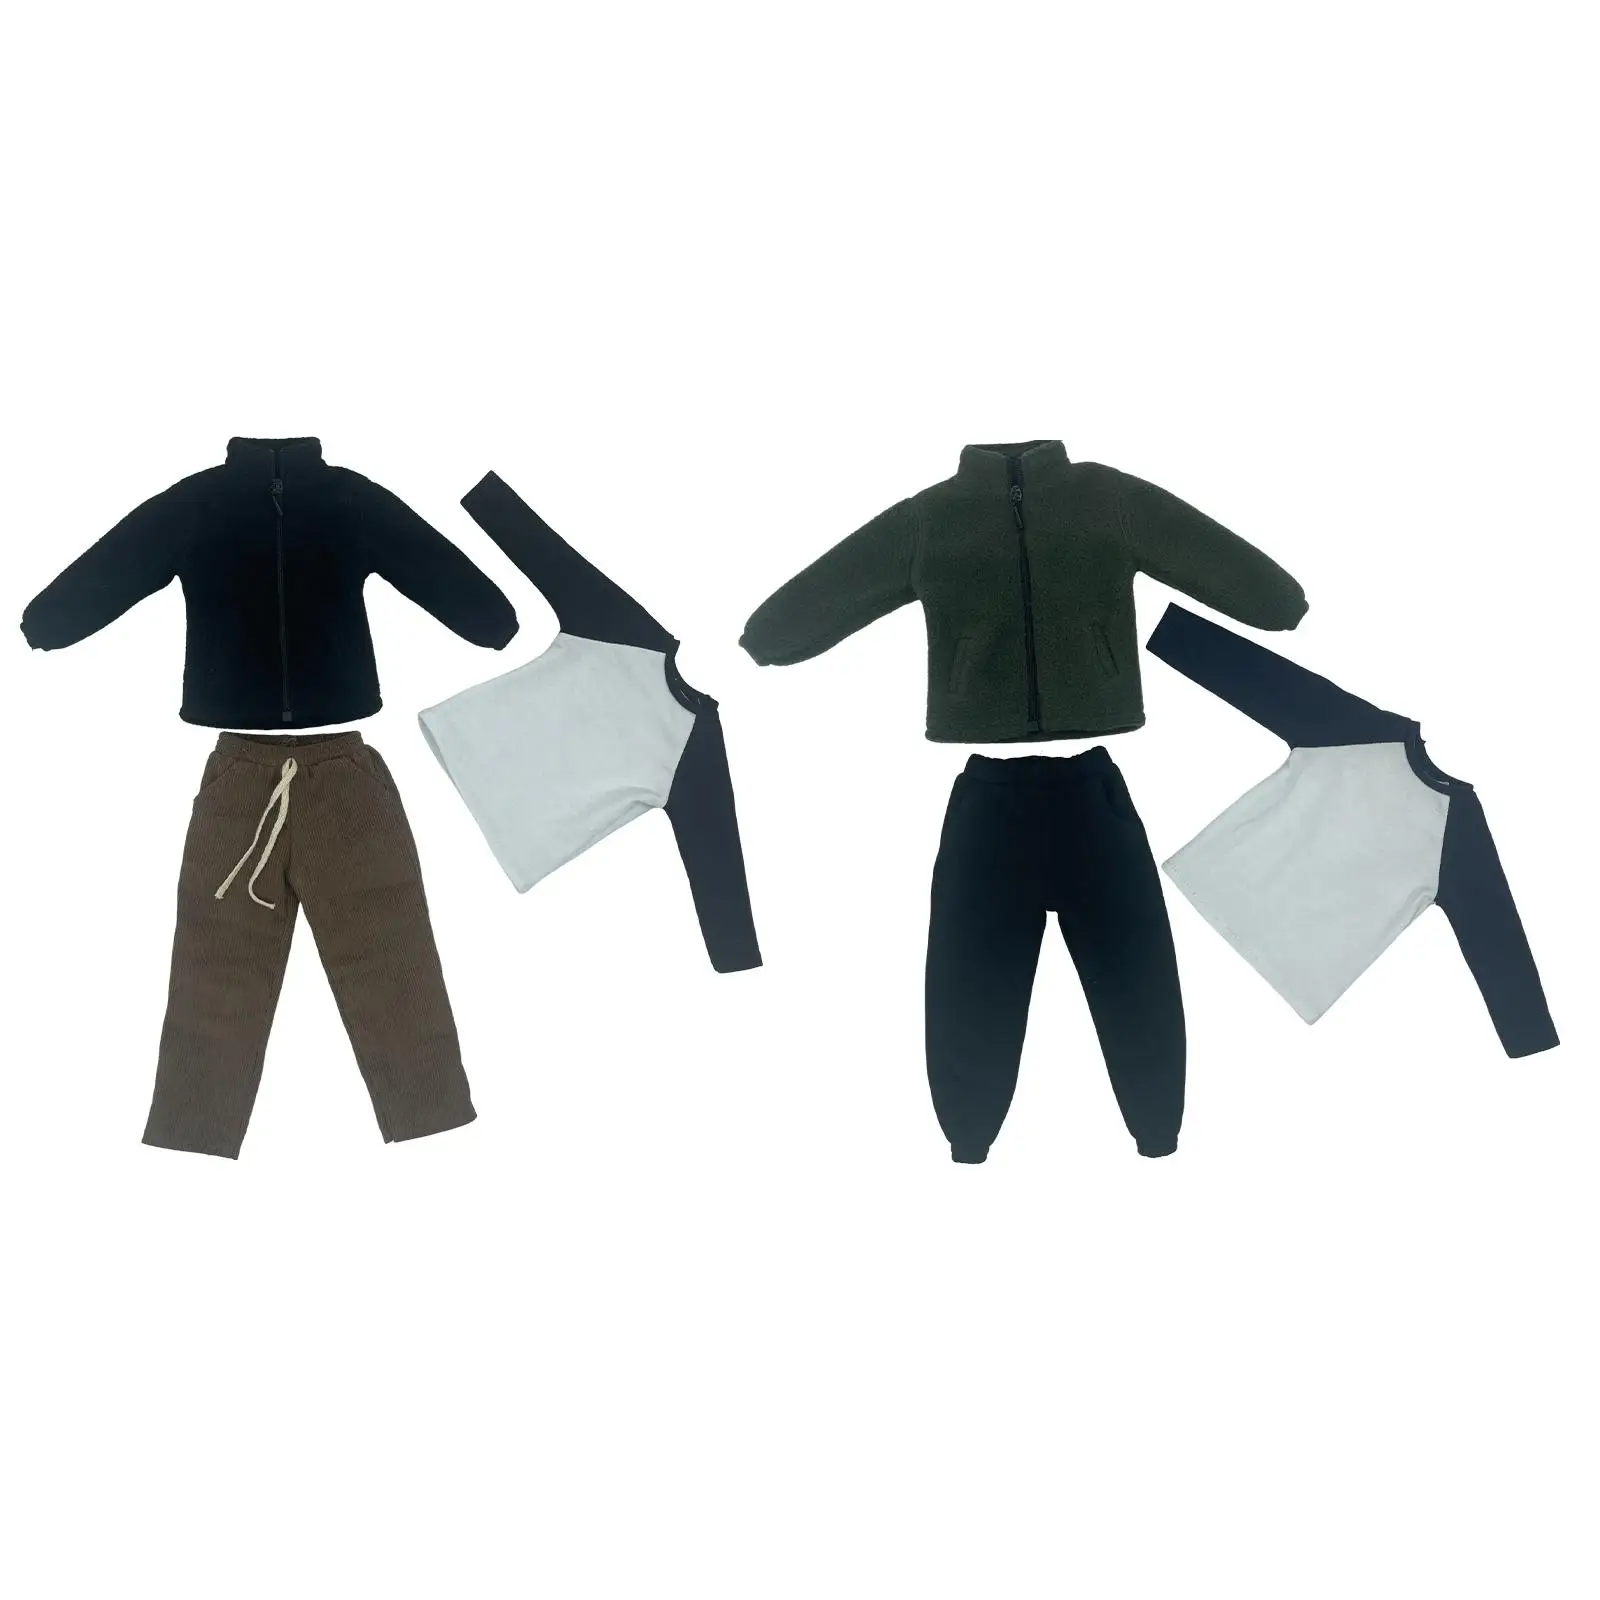 

3x 1/6 Men Fleece Jacket and T Shirt Pants Miniature Clothing for 12" Doll Model Dress up Male Soldiers Figures Accessory